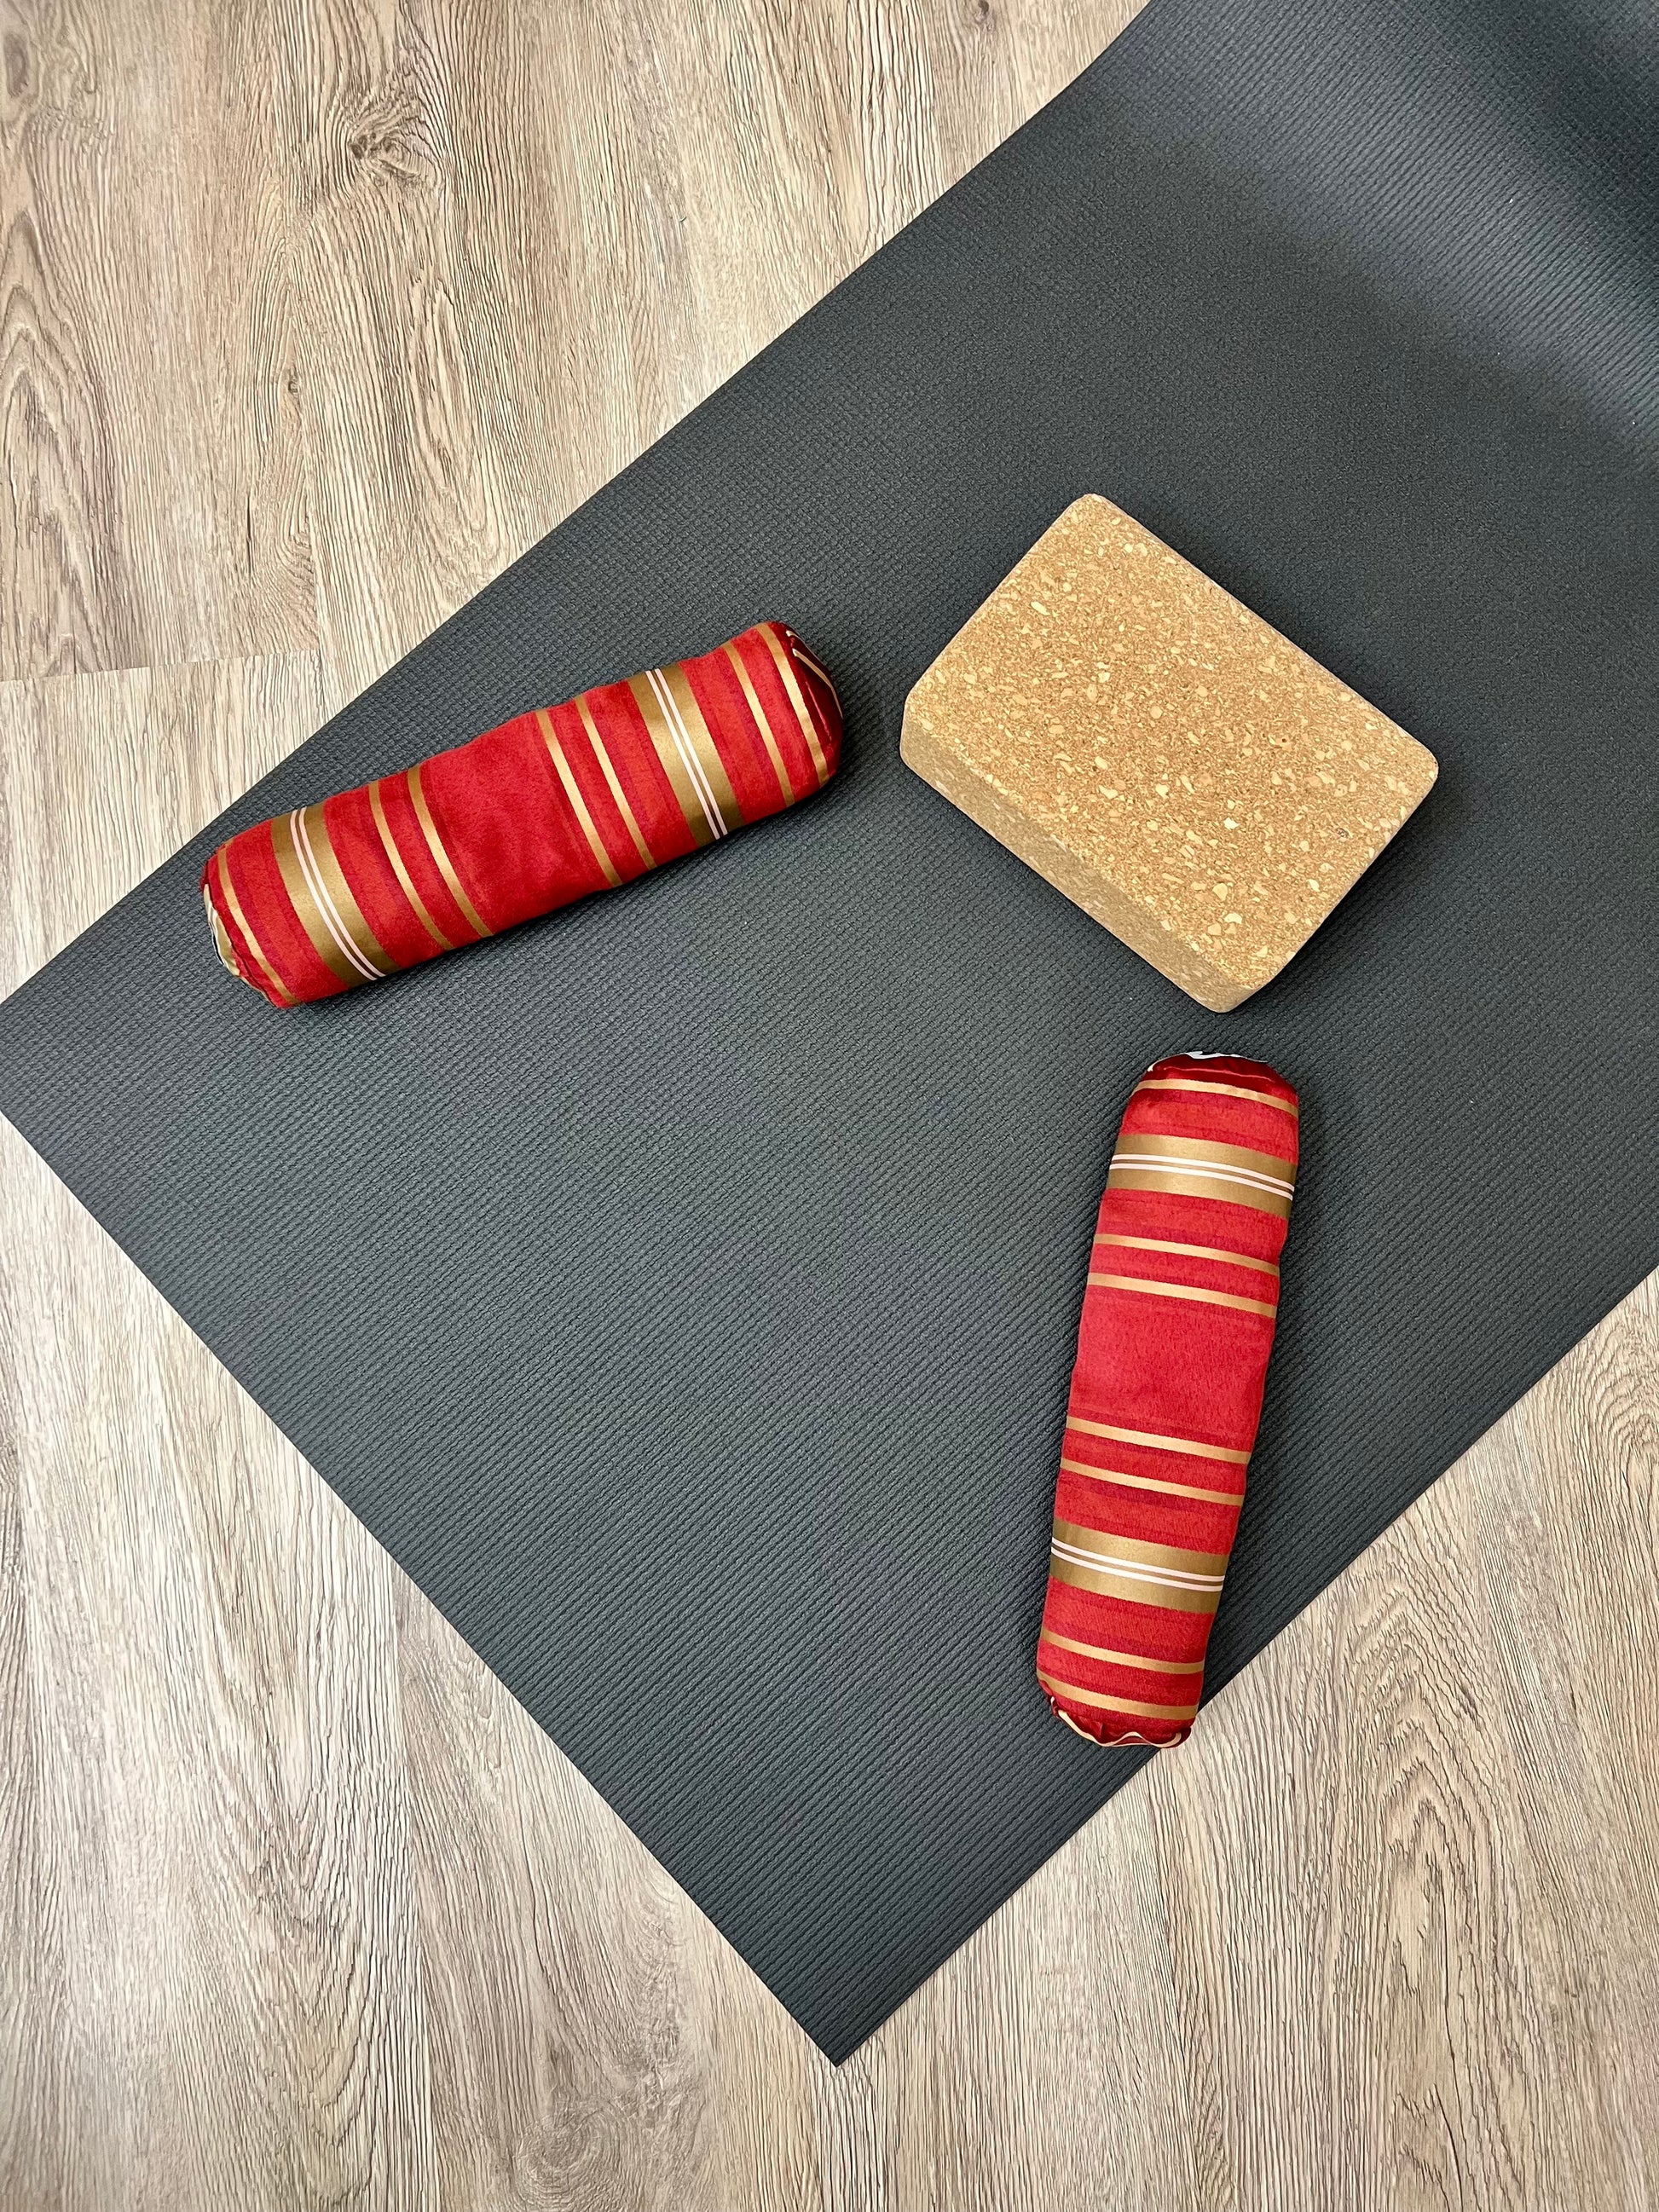 Mini yoga bolster in durable fabric, red gold stripe fabric. Cushion and support the body in the practice of yoga and meditation.Removeable cover. Made in Canada by My Yoga Room Elements